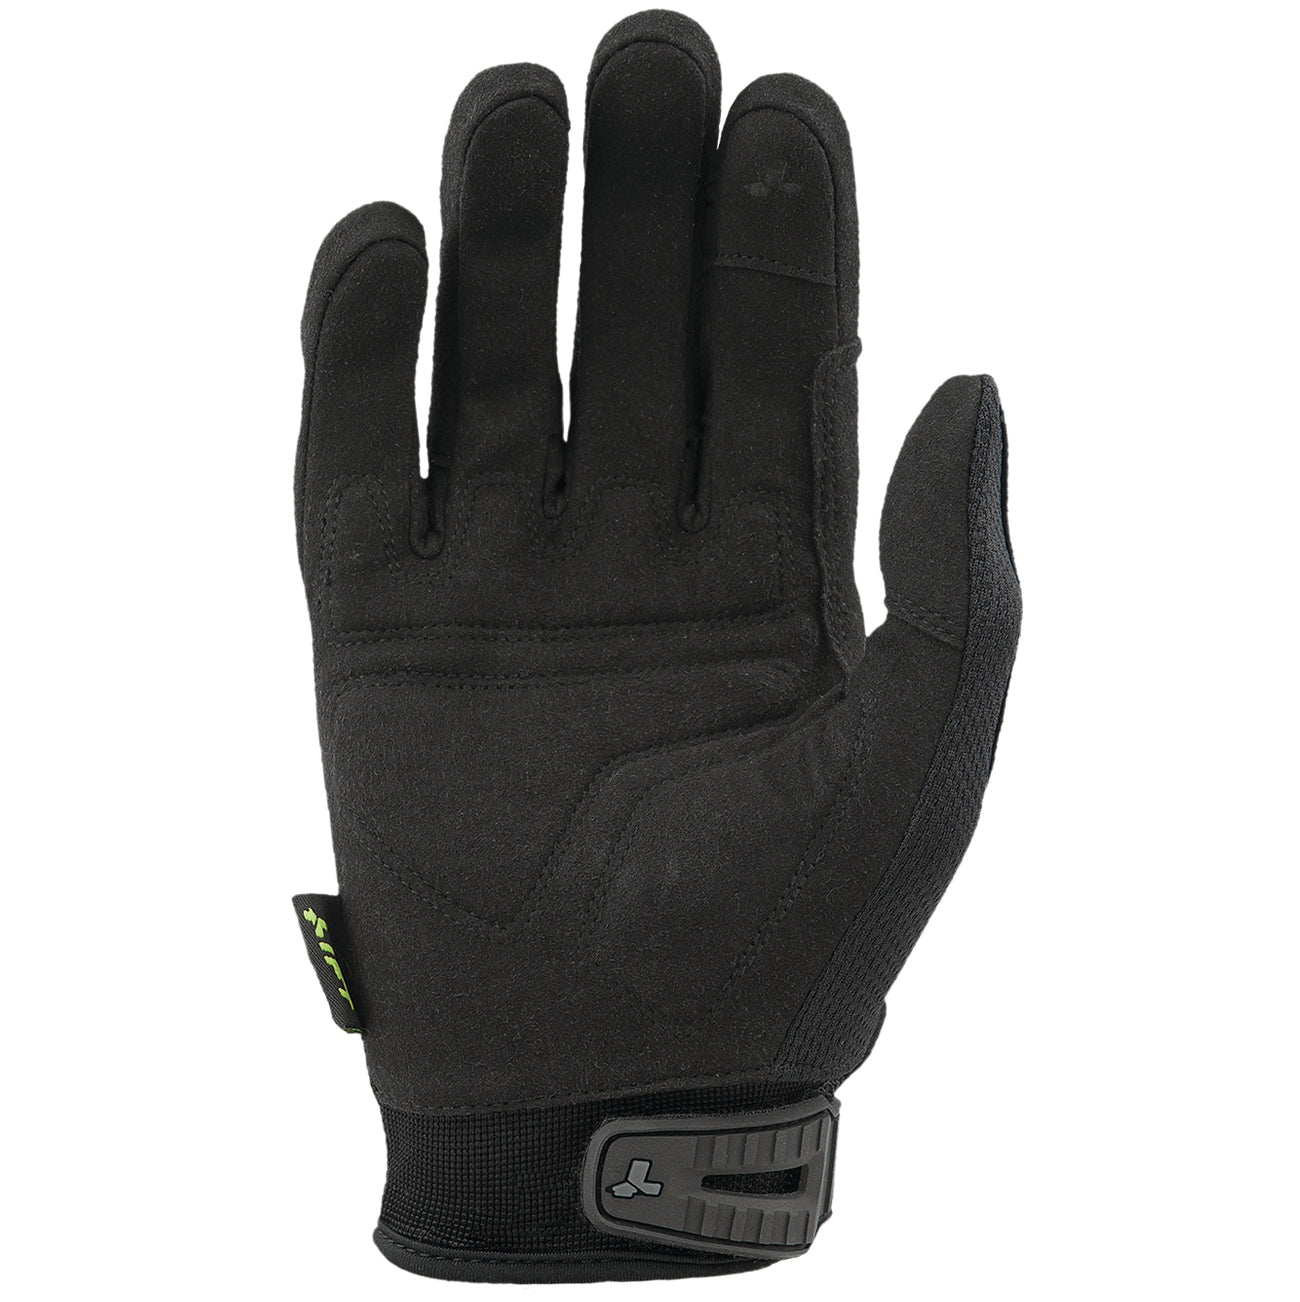 LIFT Safety - OPTION Winter Glove (Black) with Thinsulate